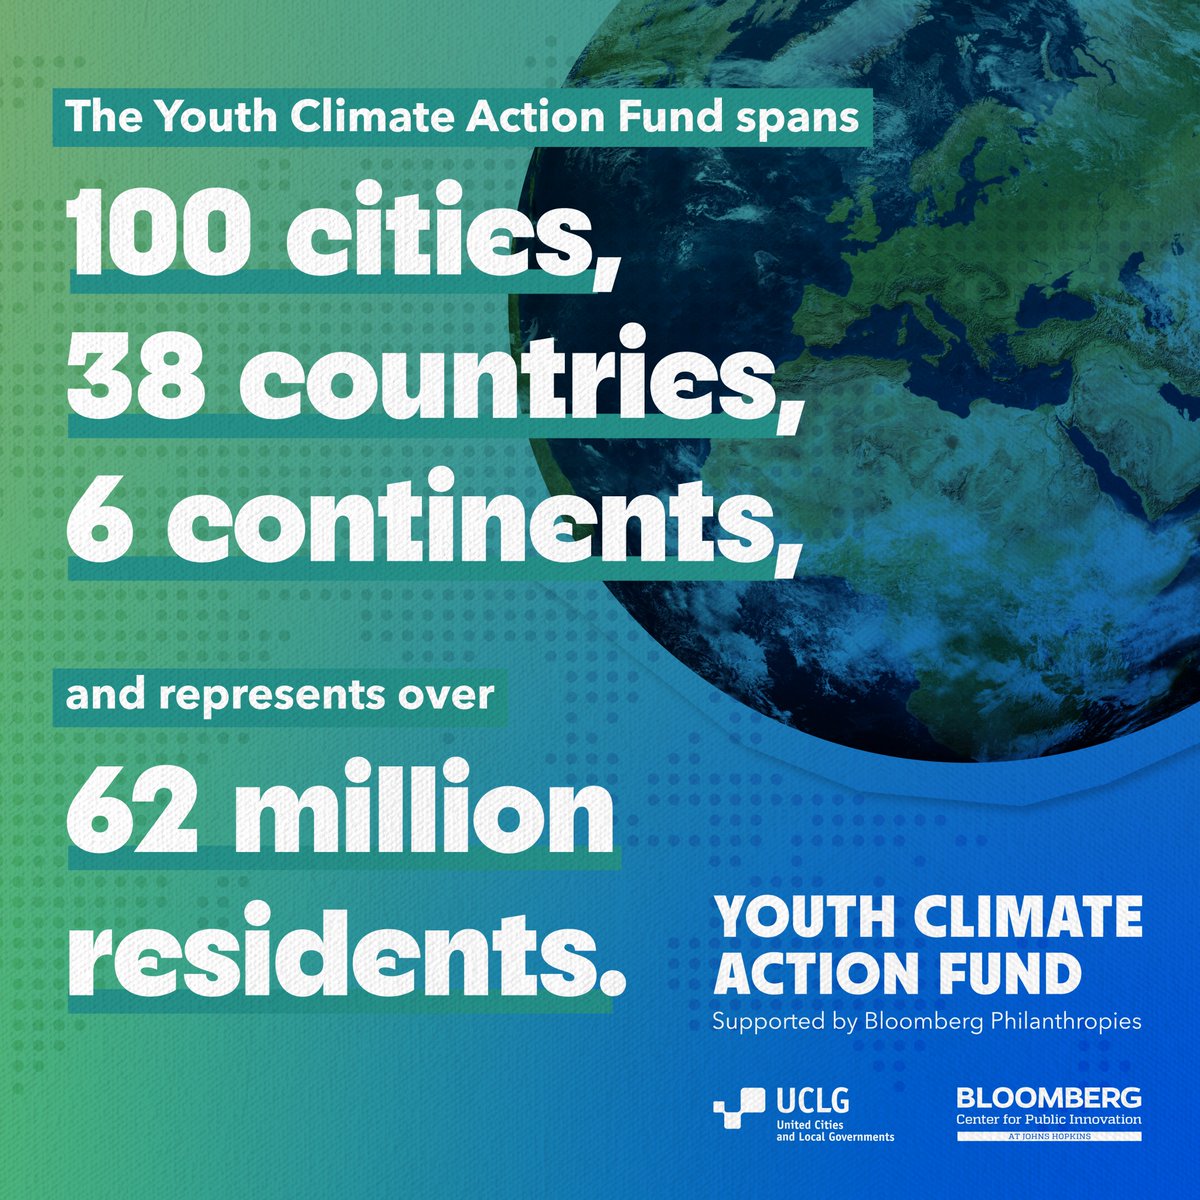 📢The #LRGs lead the fight against #ClimateChange with innovative policies and community engagement. 🌱Discover how the Youth Climate Action Fund implemented by @uclg_org engages new generations at the local level: